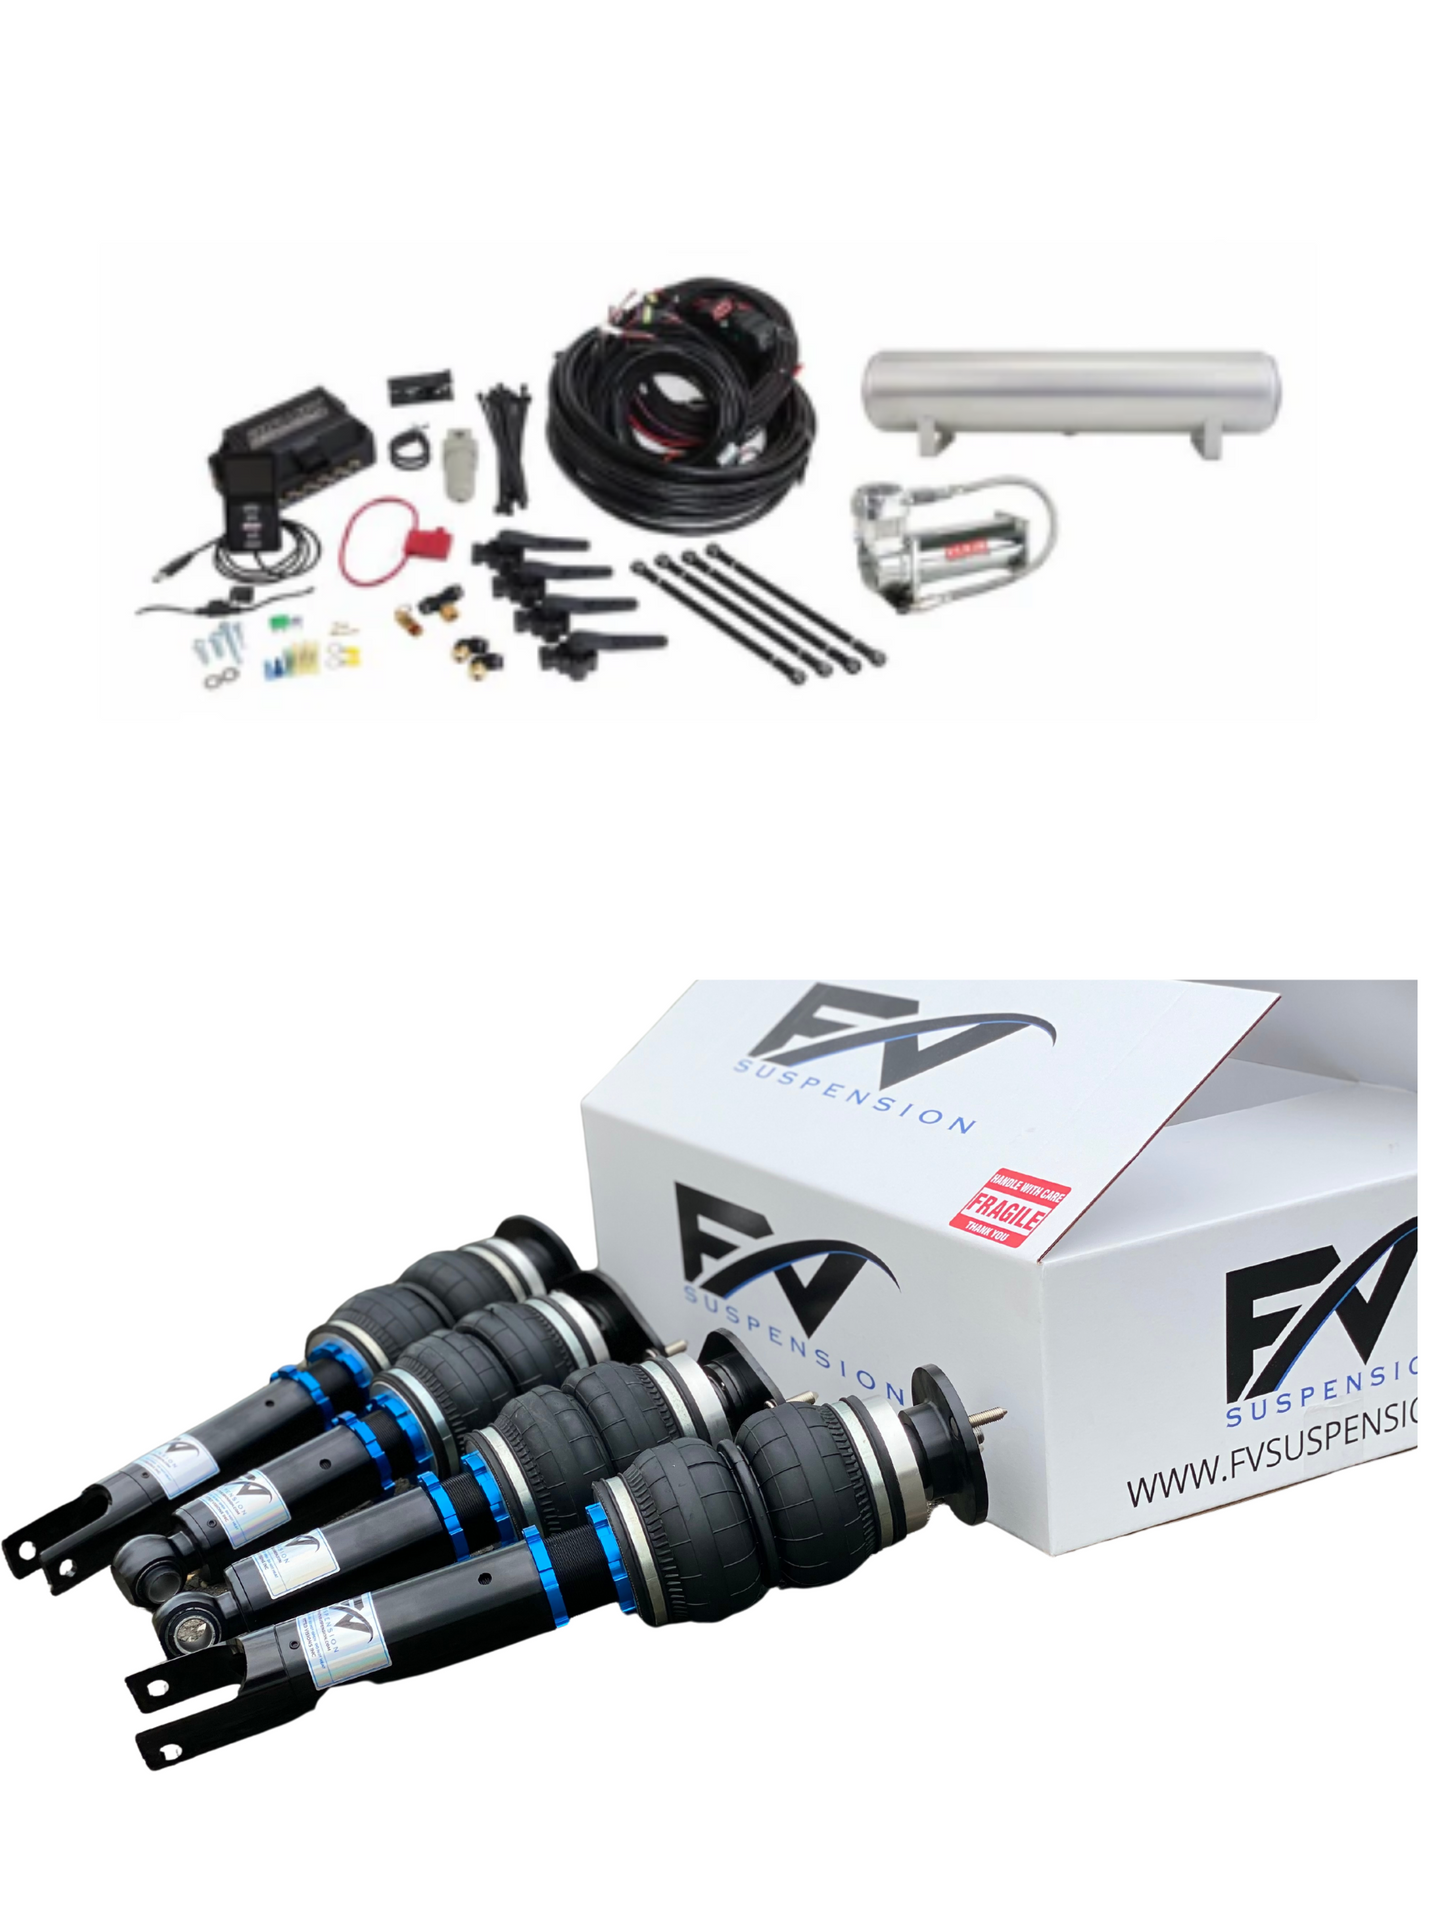 FV Suspension 3H Tier 3 Complete Air Ride kit for 13-17 Toyota Camry - FVALtier3kit635